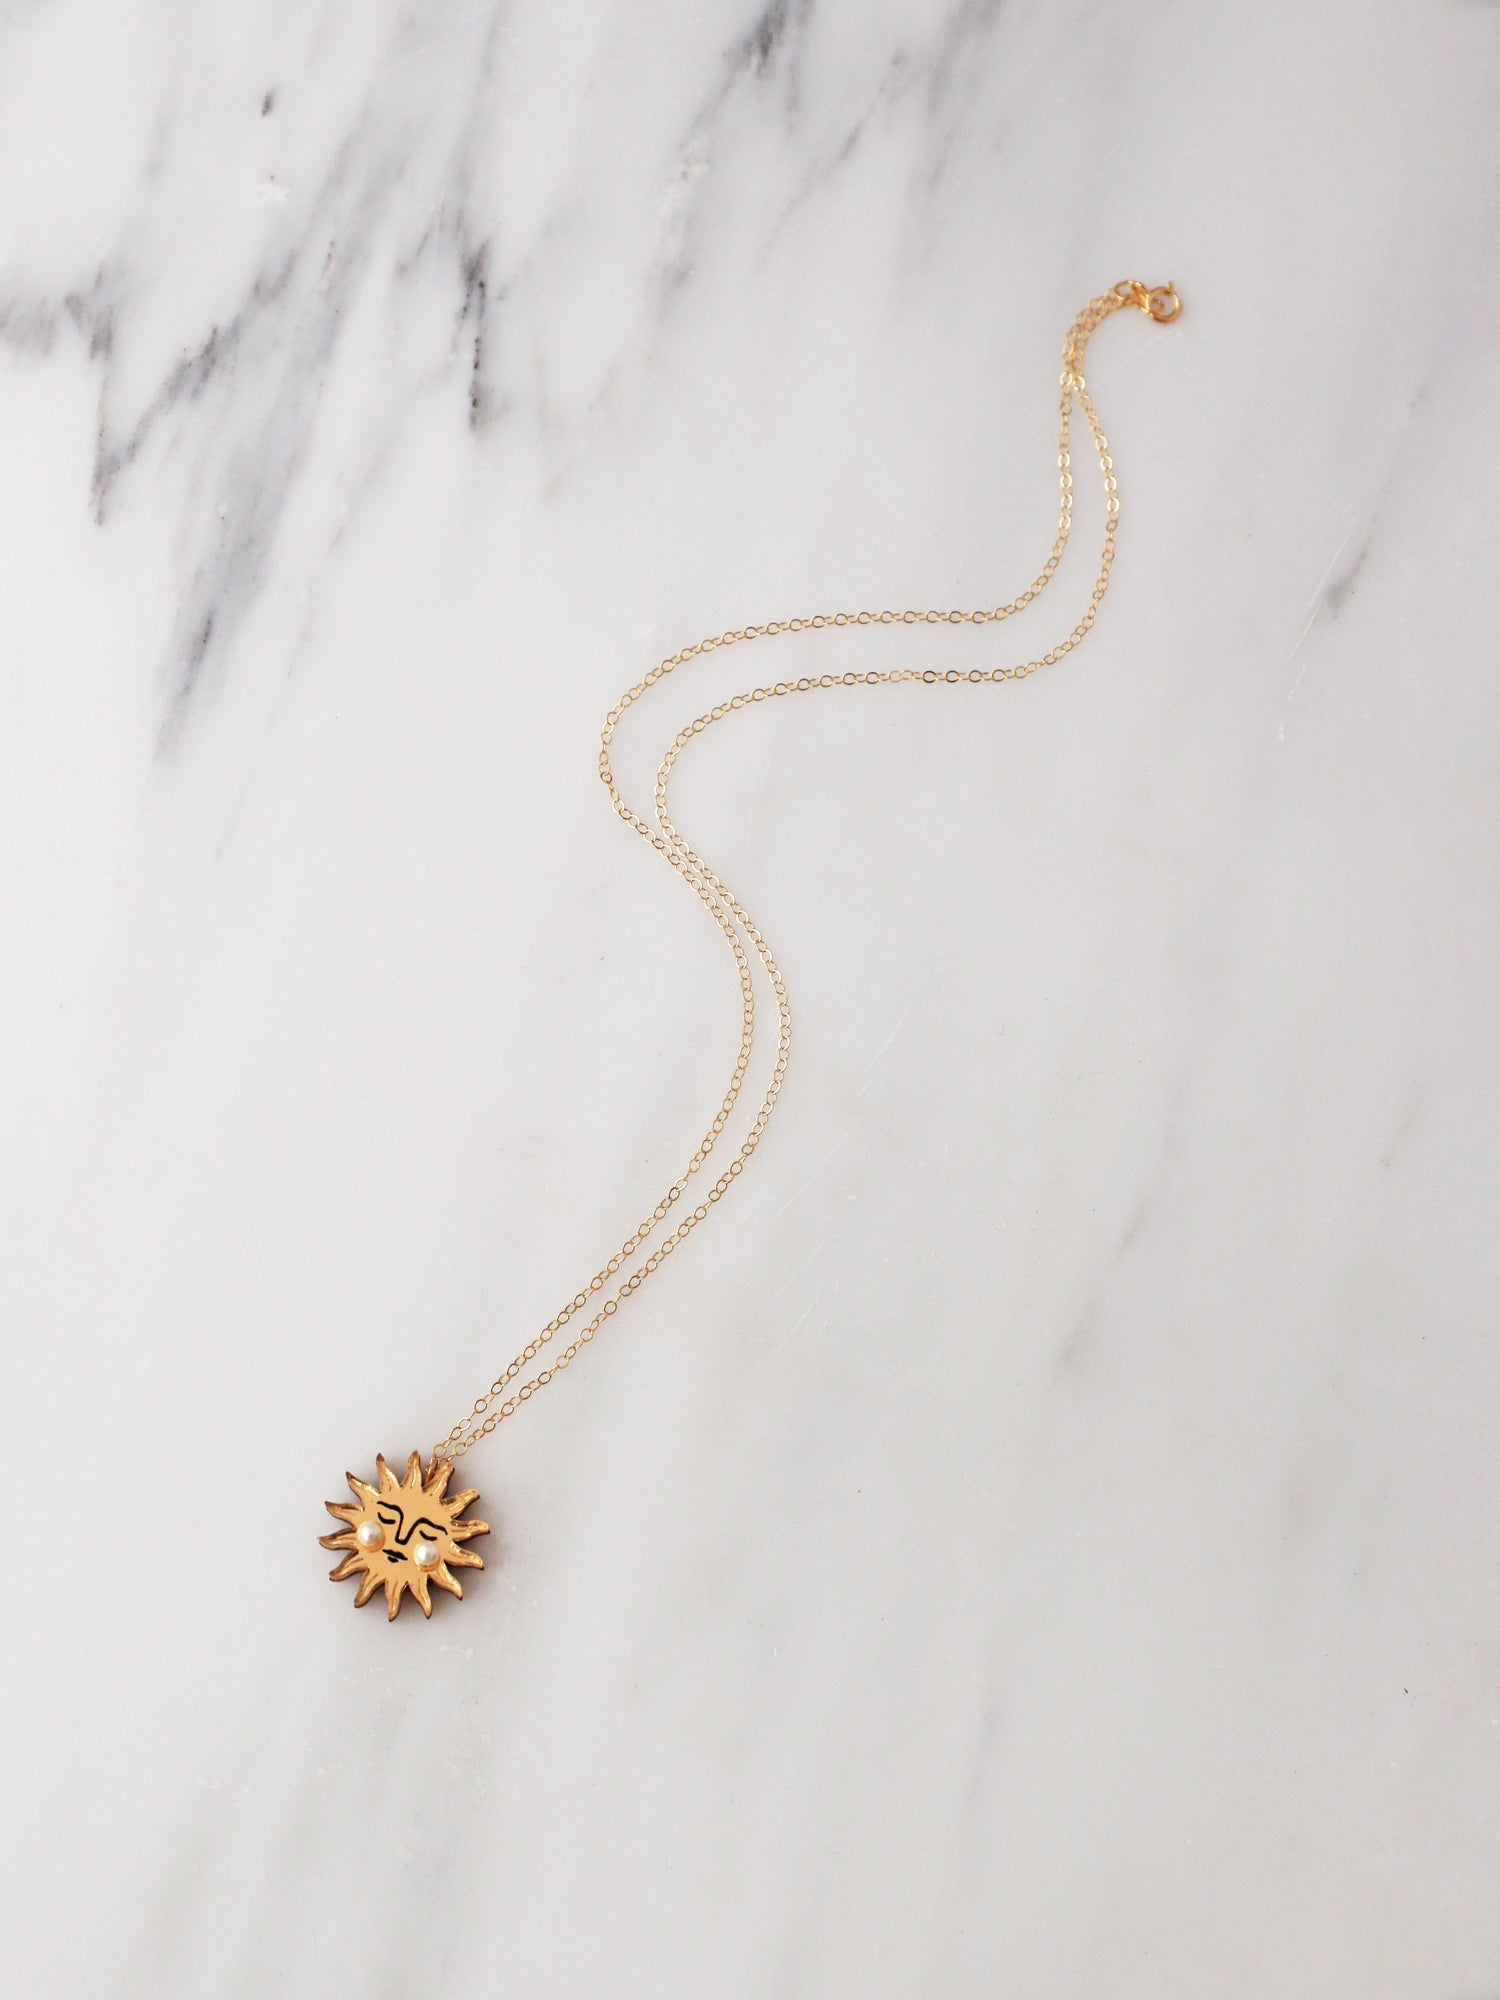 Sun Necklace in Gold. Pendant necklace made with laser cut acrylic, Czech glass pearls and hand inked details. Handmade in the UK by Wolf & Moon.